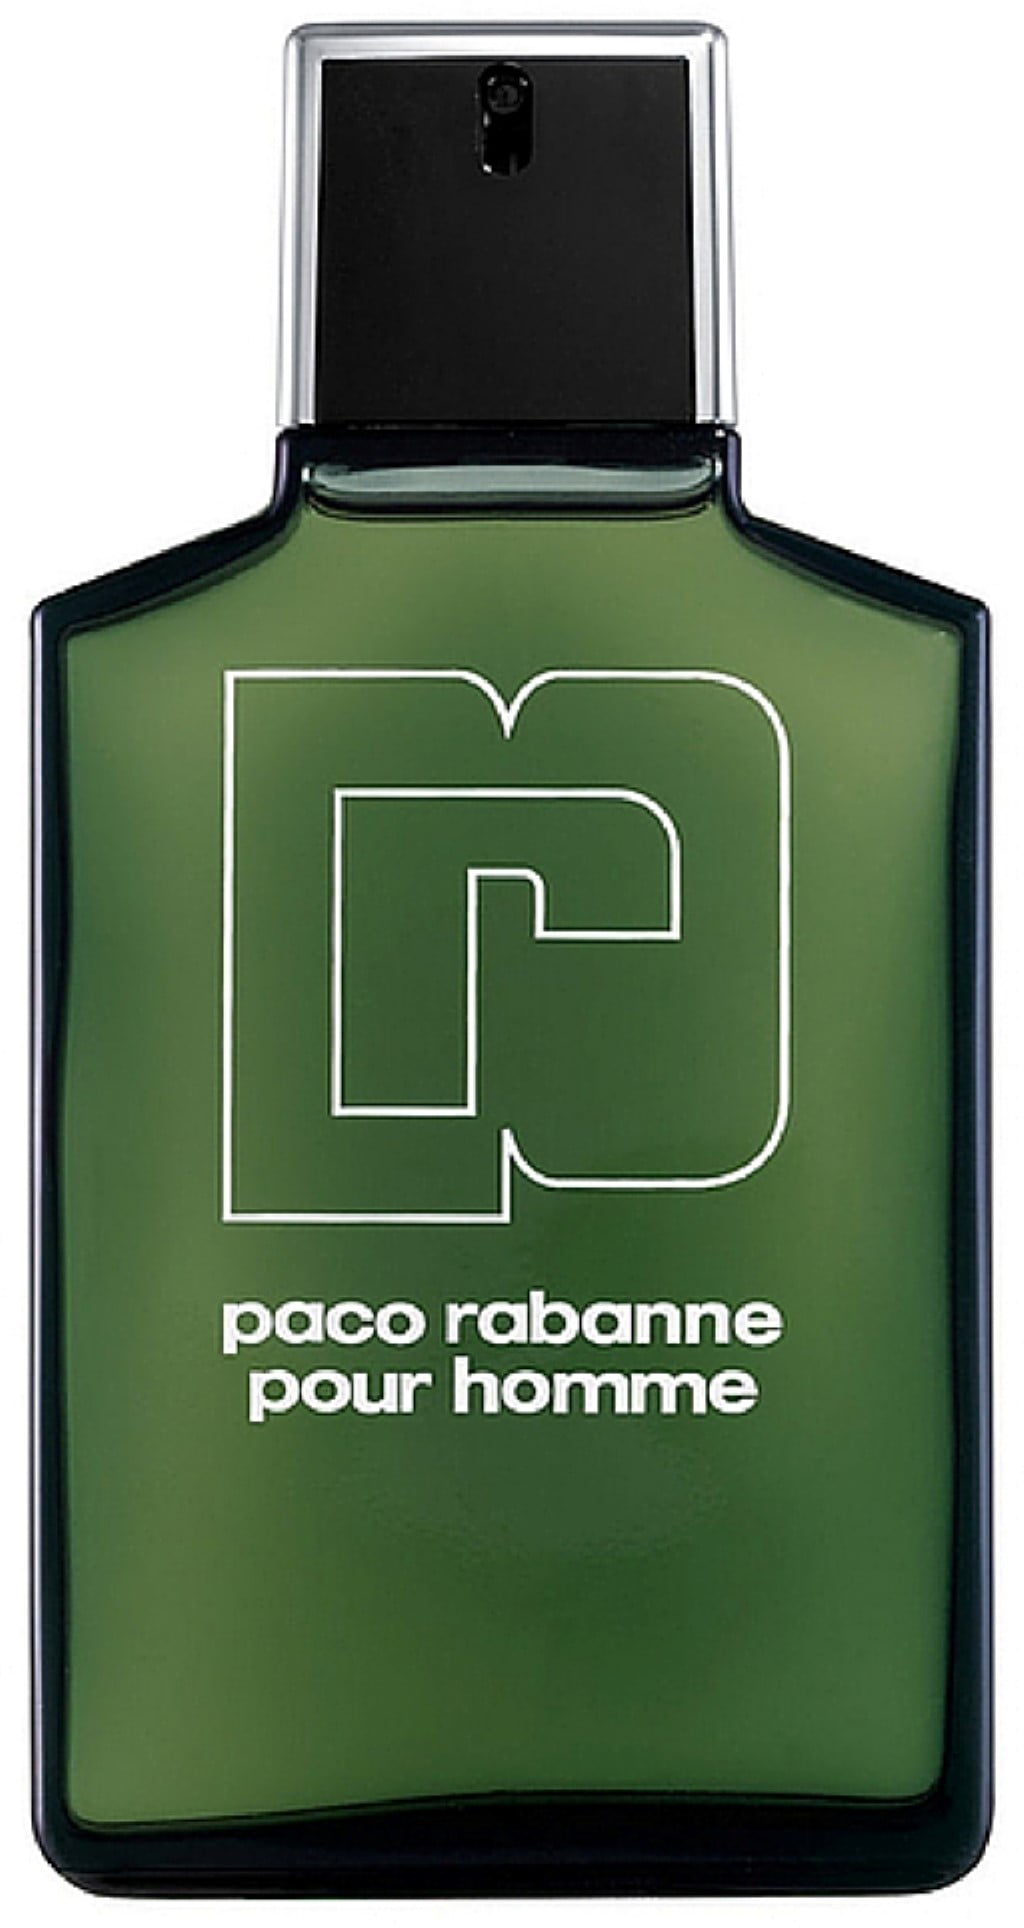 Paco rabanne homme. Paco Rabanne pour homme 100 мл. Paco Rabanne pour homme men 30ml EDT Tester. Paco Rabanne Paco мужские духи. Paco Rabanne pour homme EDT.